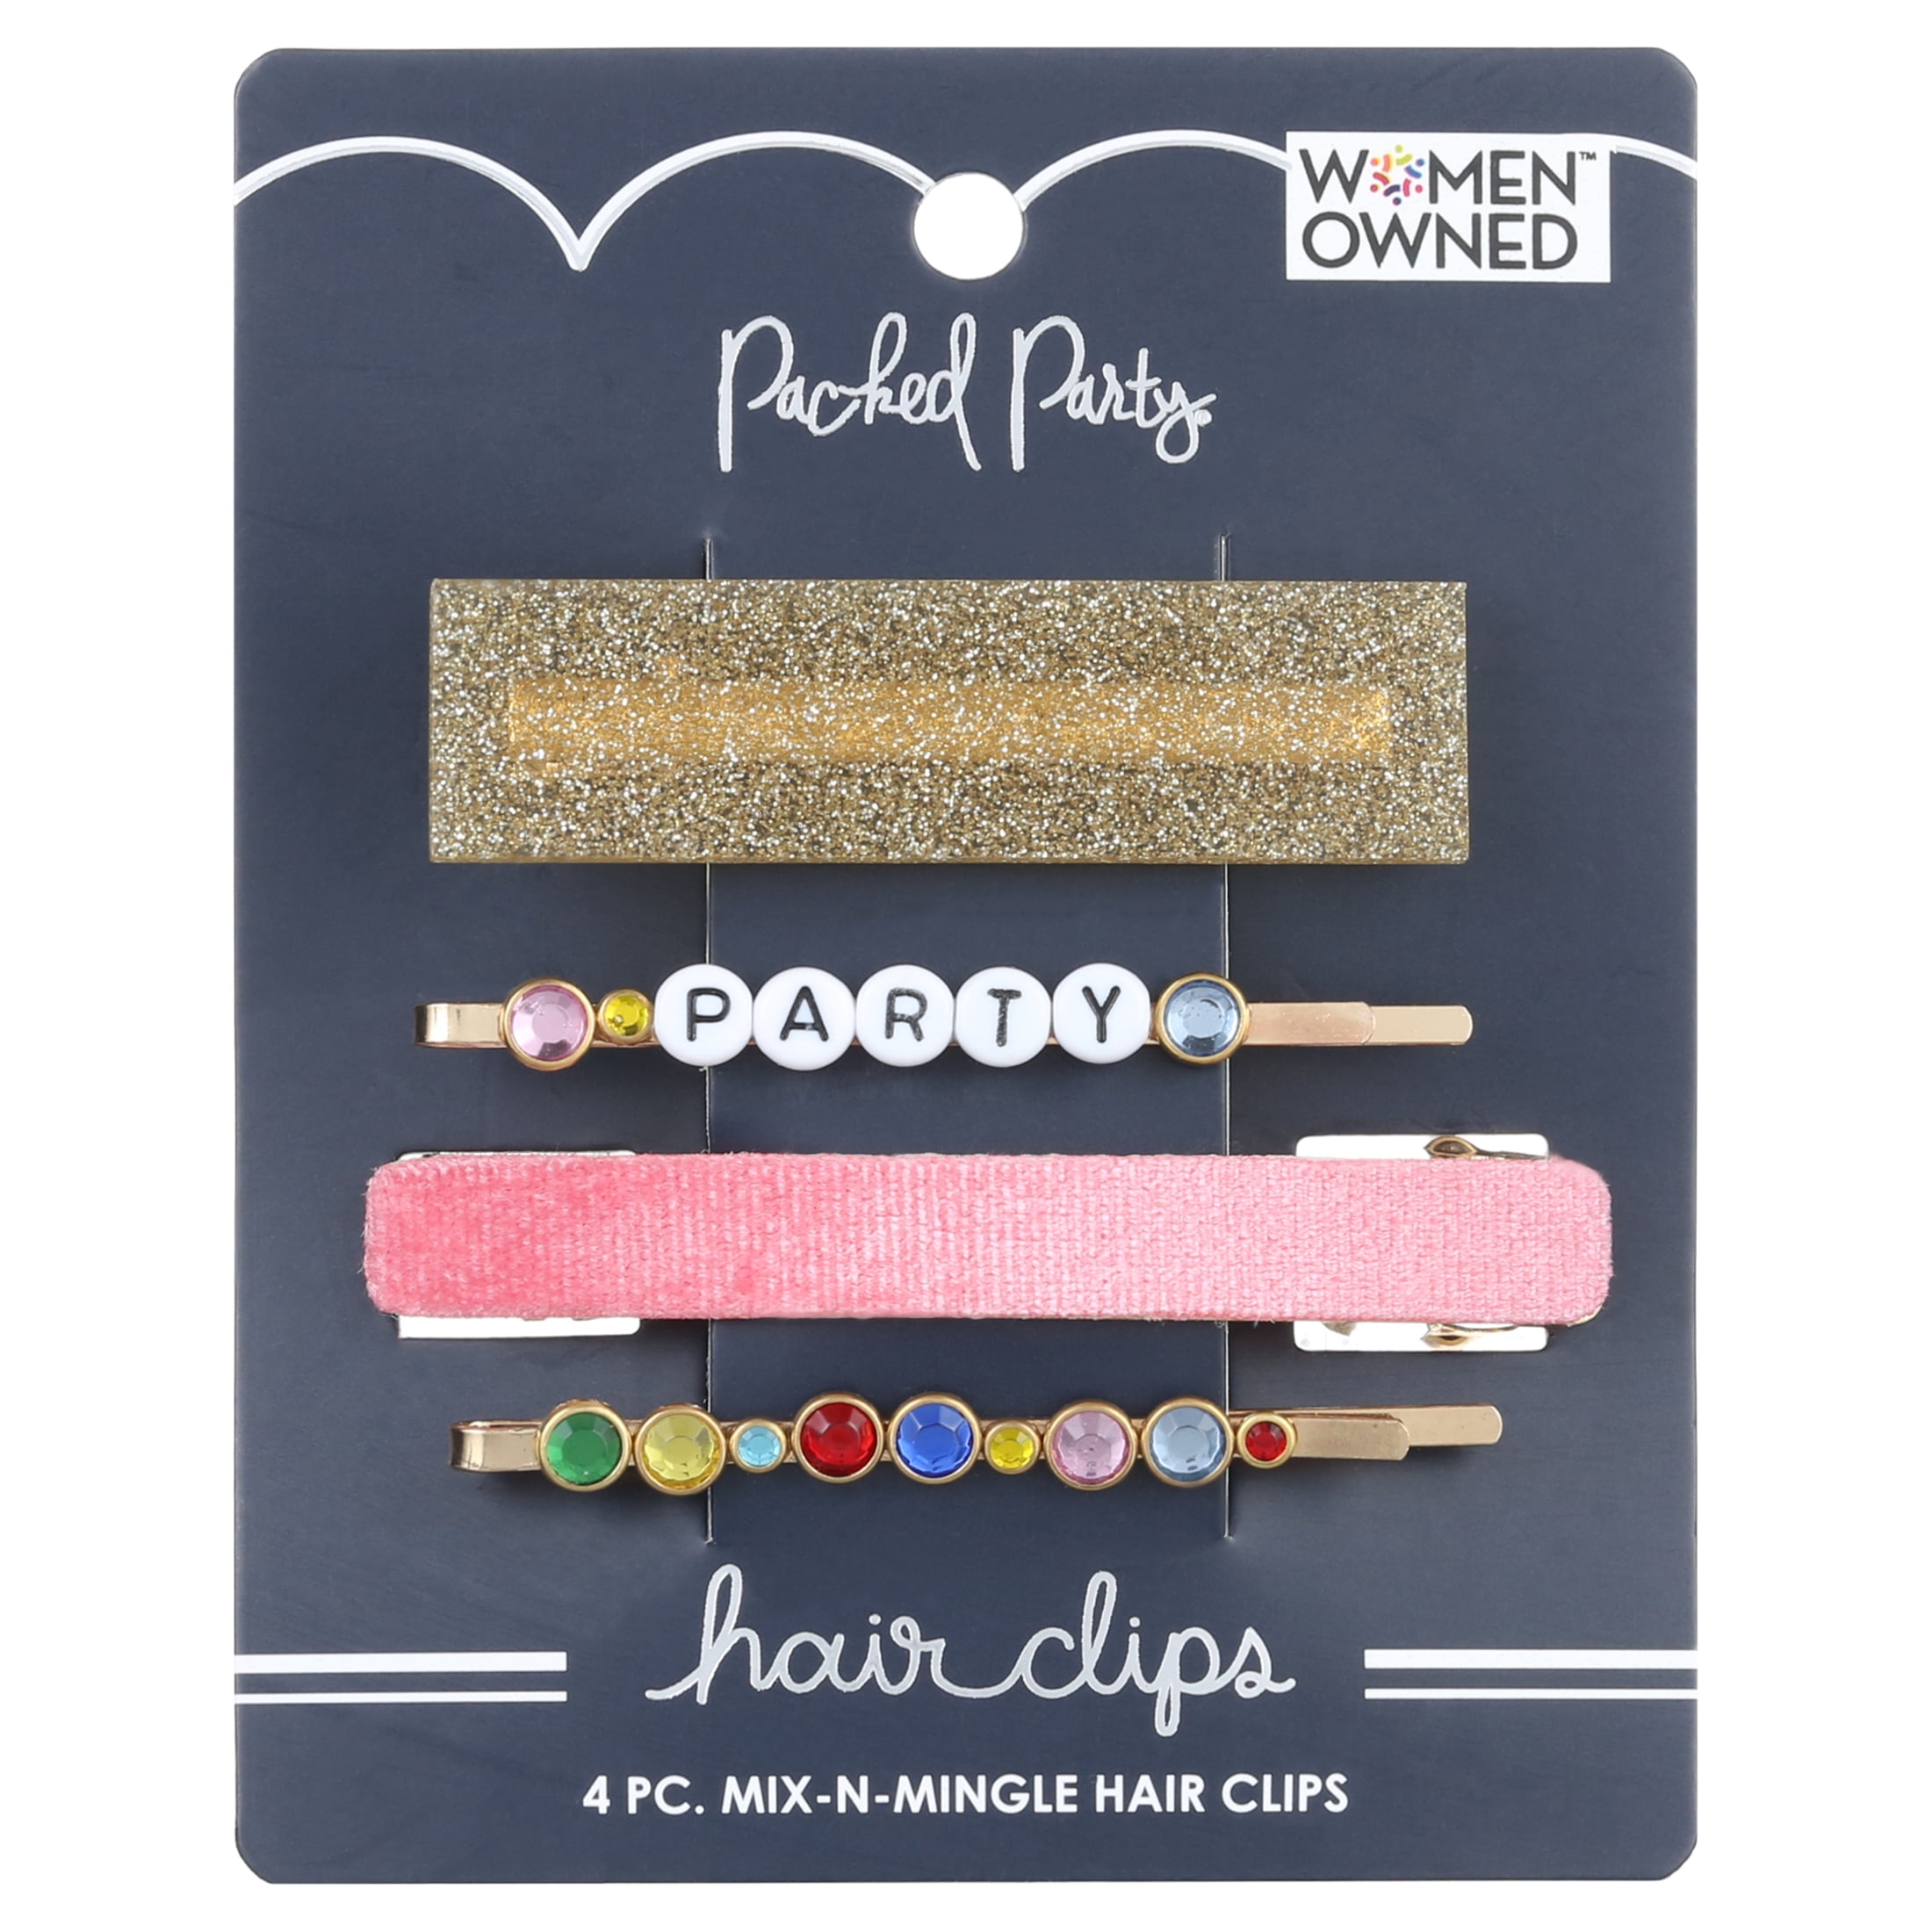 Packed Party “Mix-N-Mingle” Multi-Color Assorted Hair Clips, 4 Pieces ...